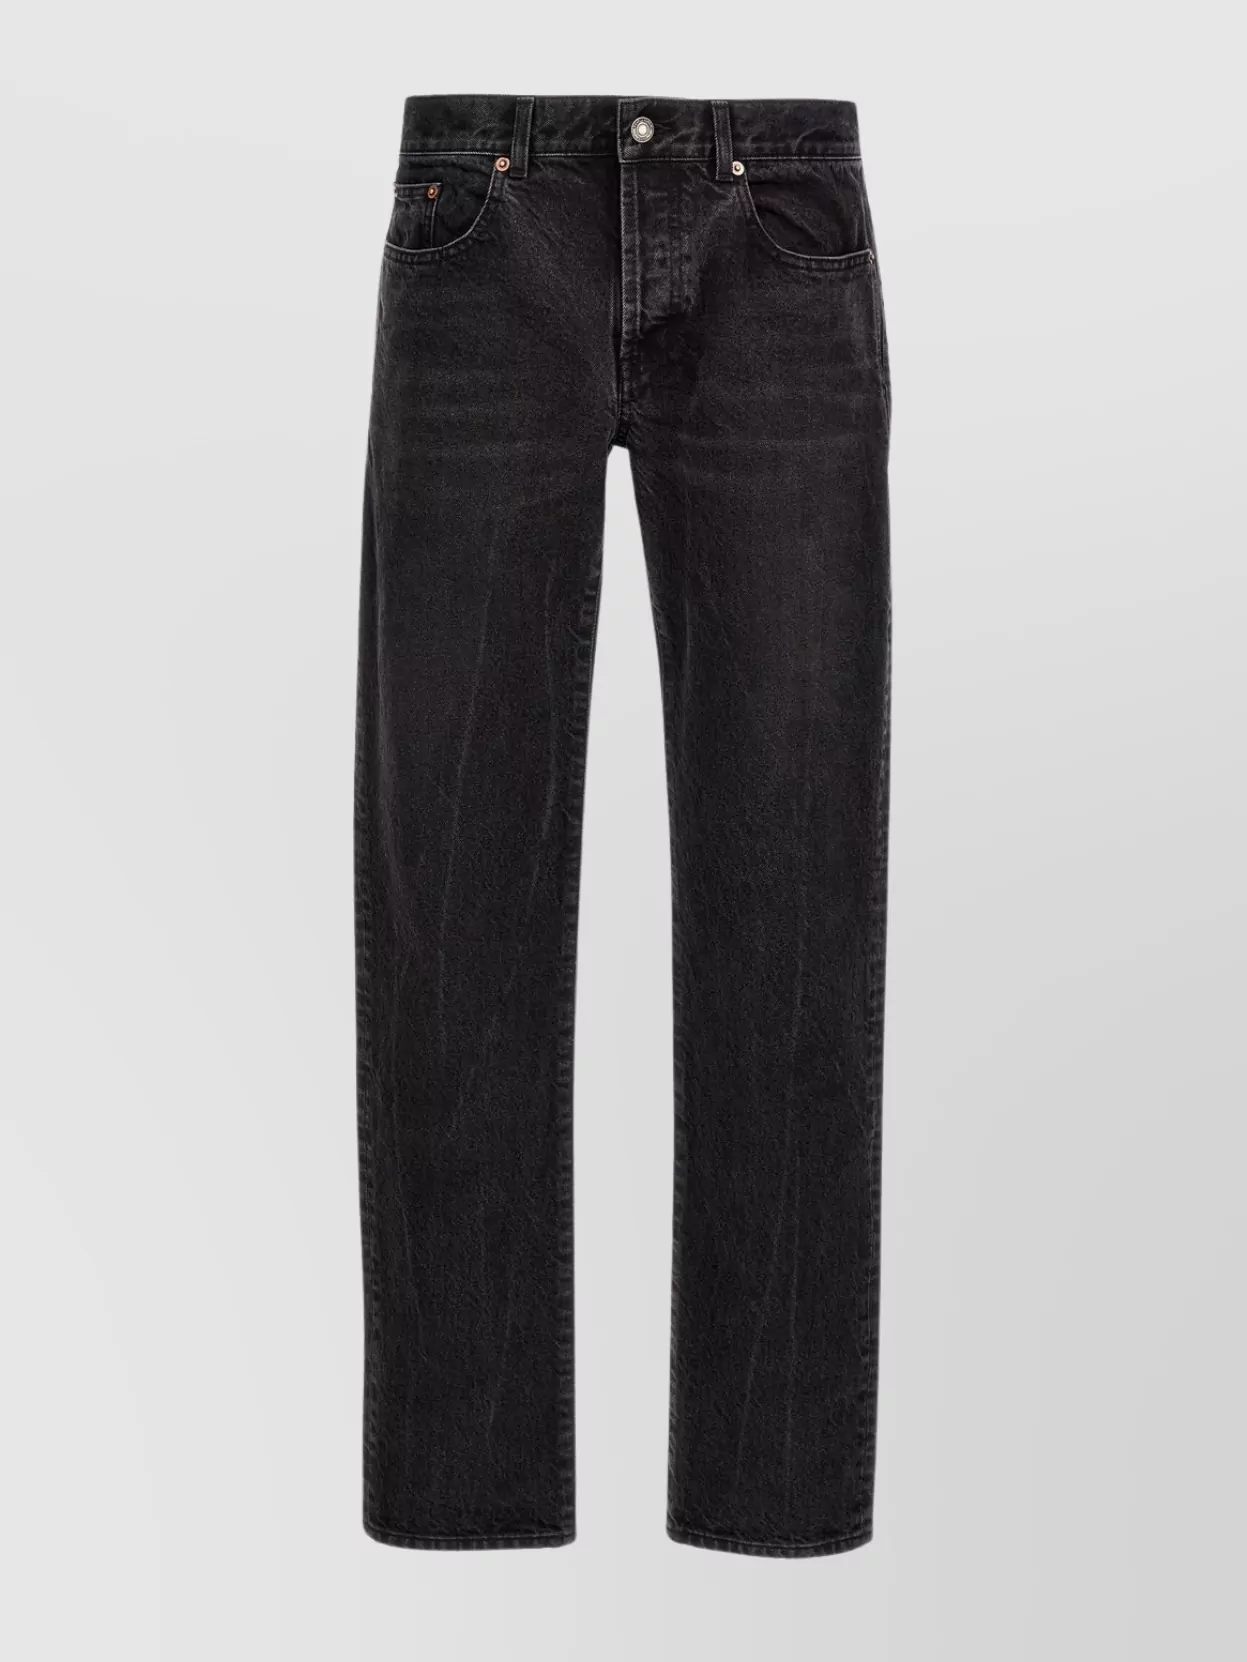 Saint Laurent Slim Fit Straight Leg Jeans With Five Pockets In Black